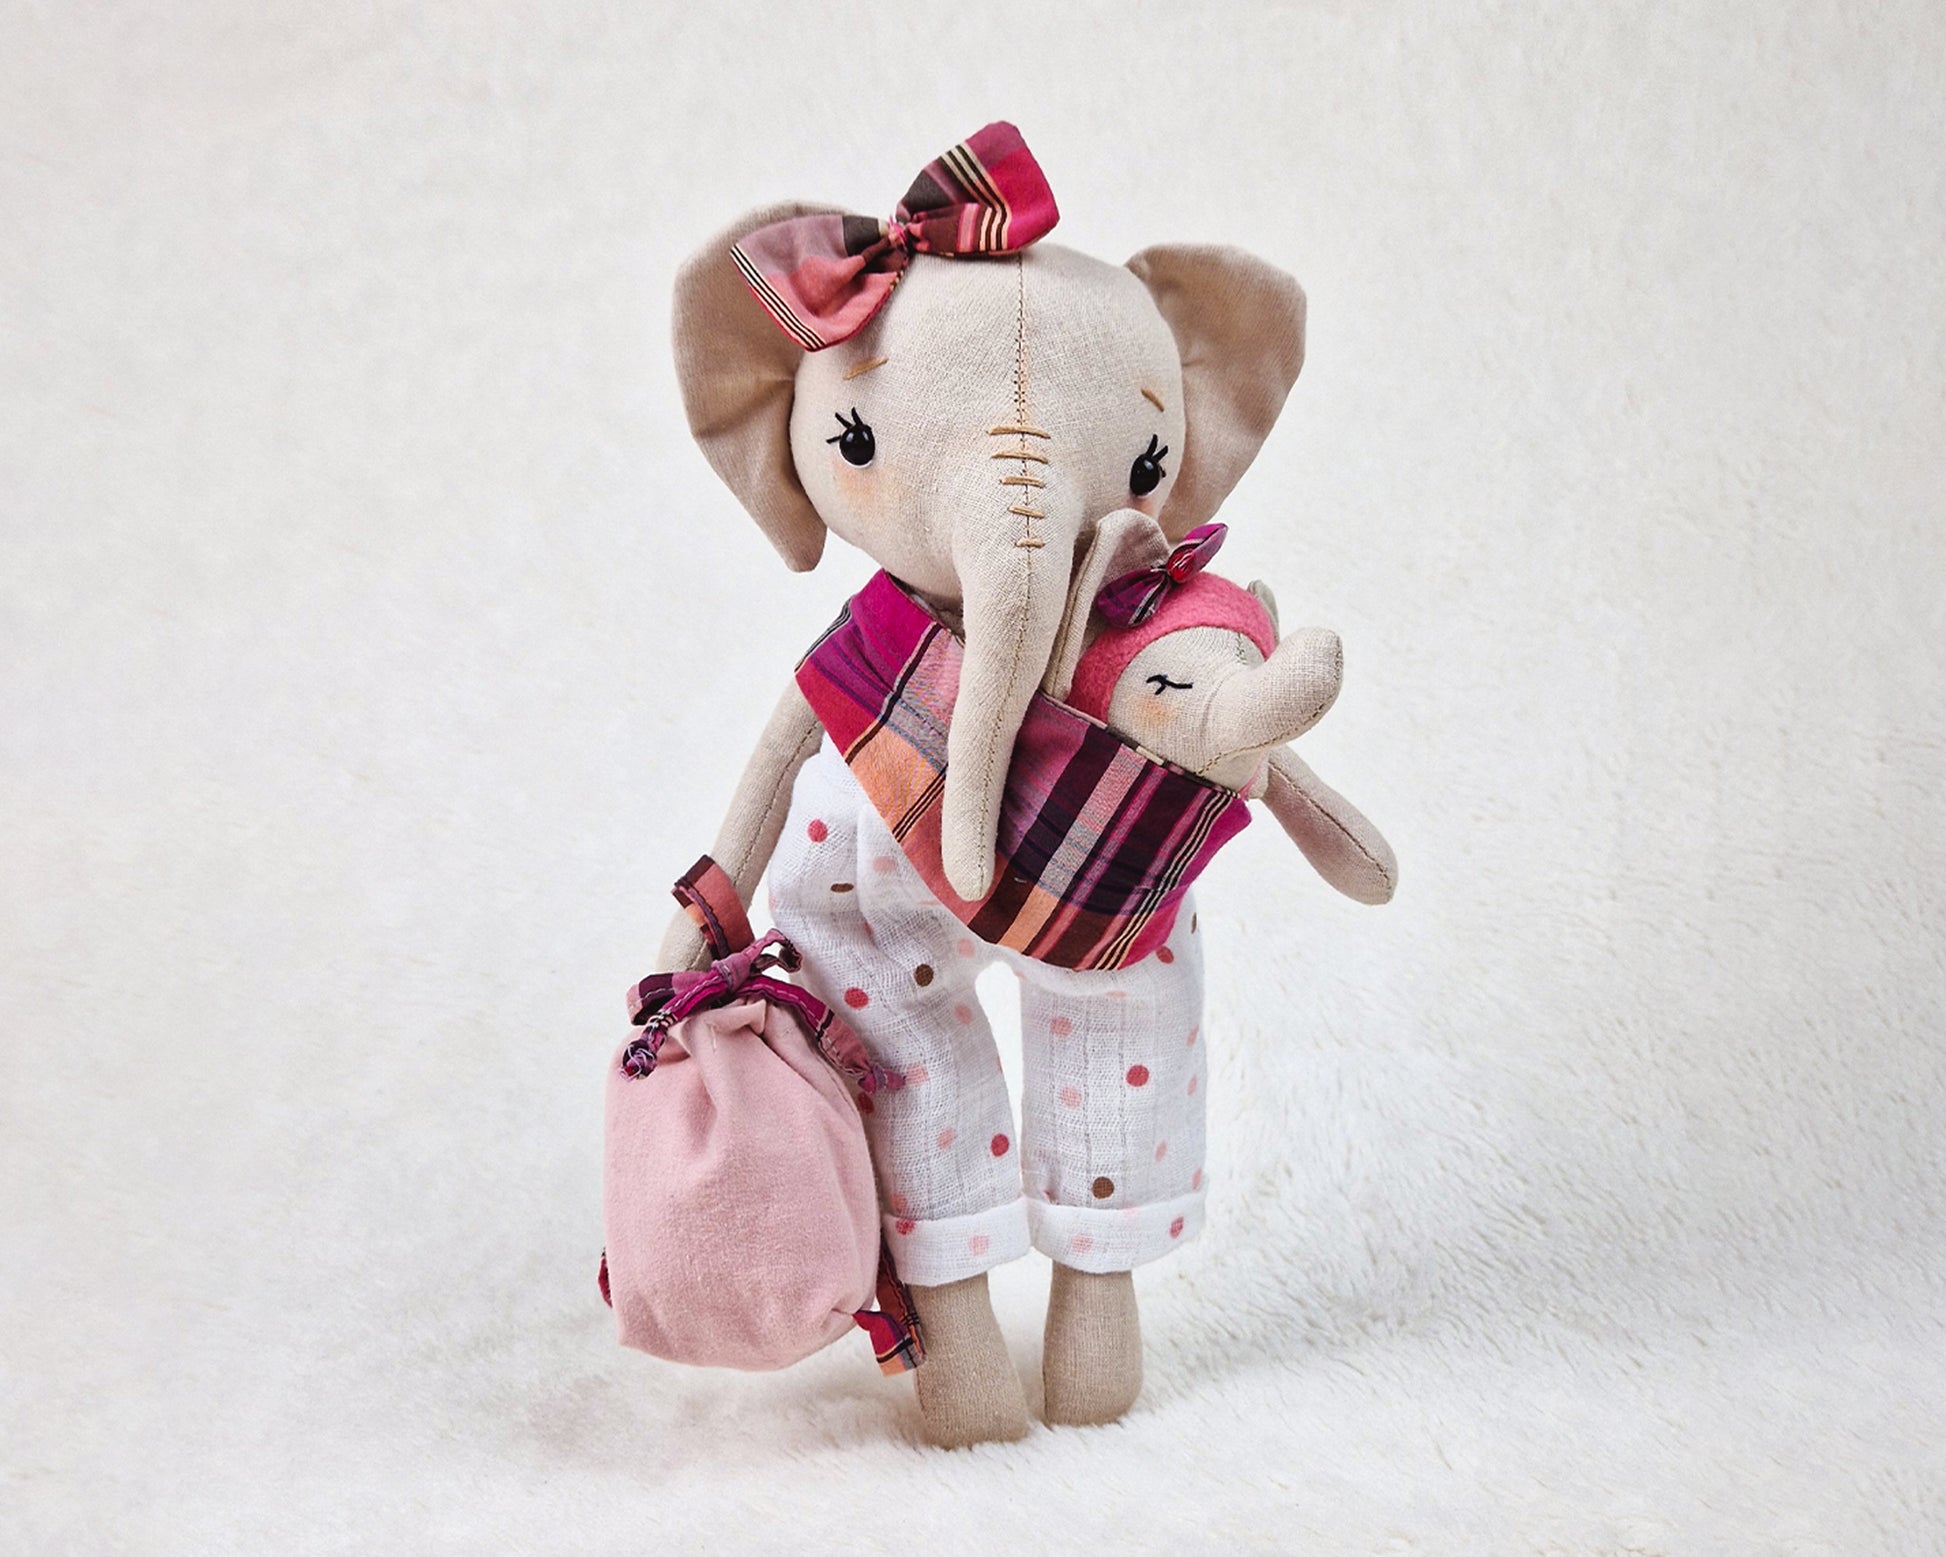 Clothes and accessories from Bear, Mom and Baby collections sewing pattern and tutorials